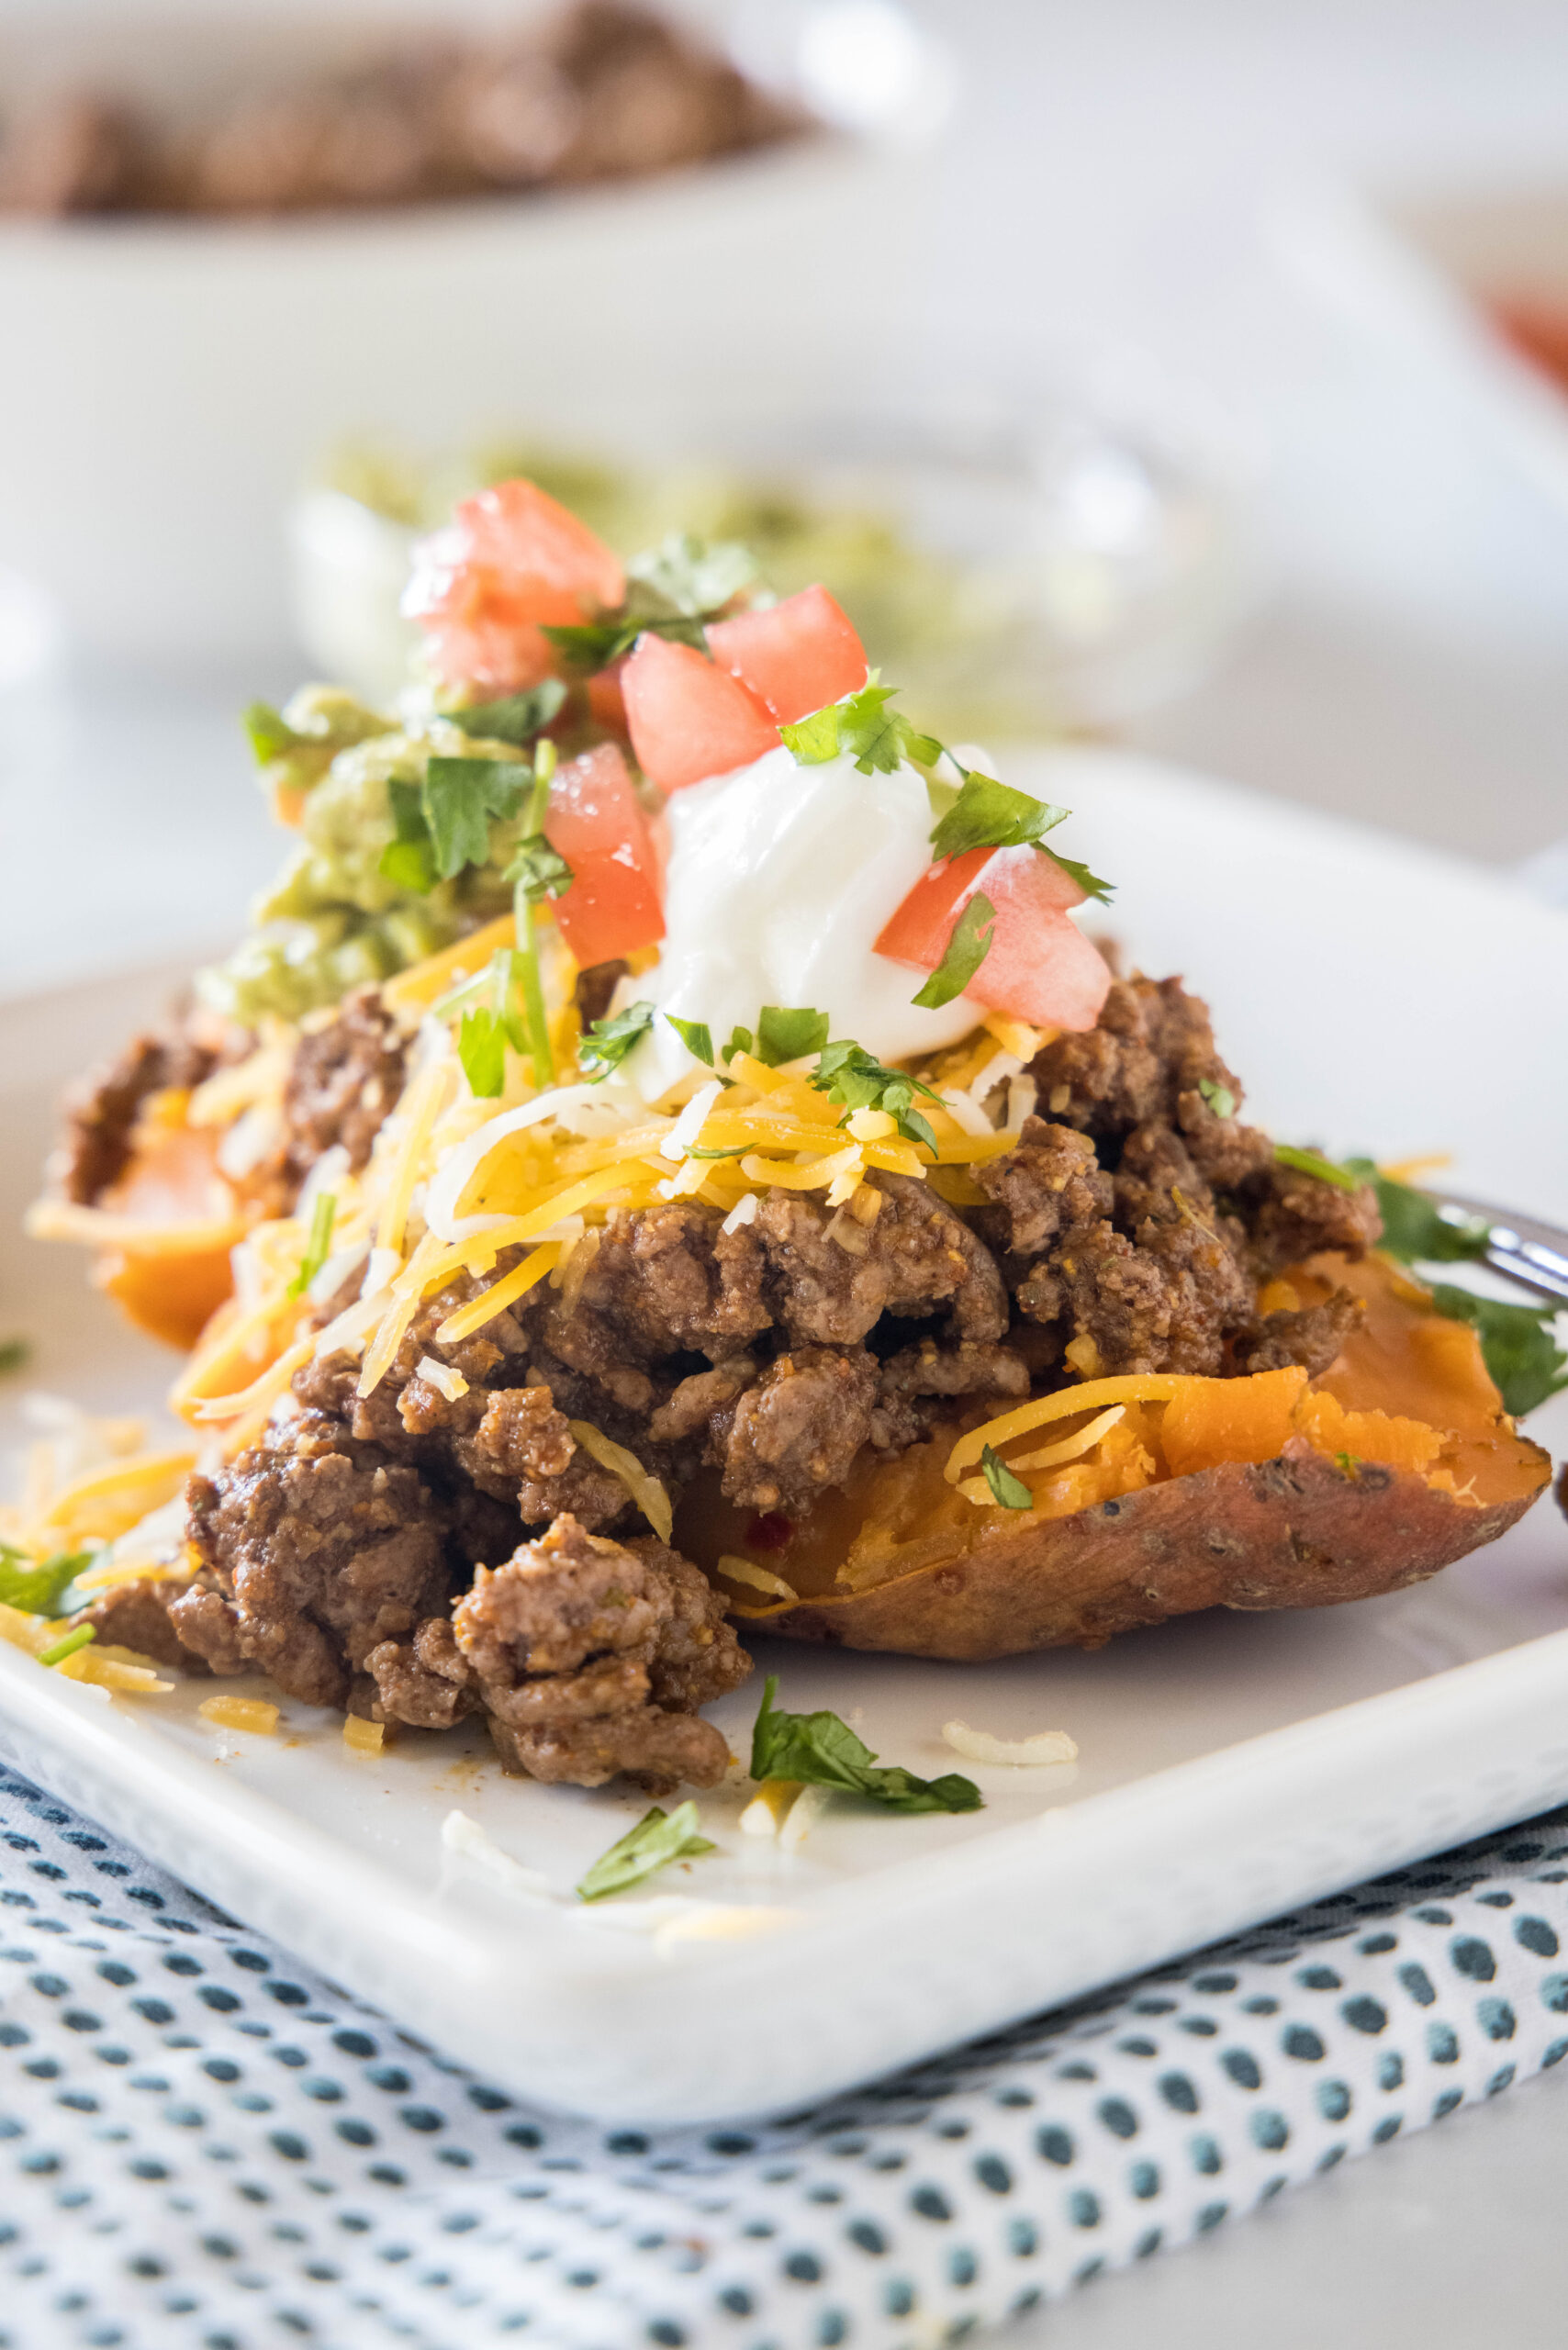 A taco sweet potato piled with taco toppings served on a white plate.